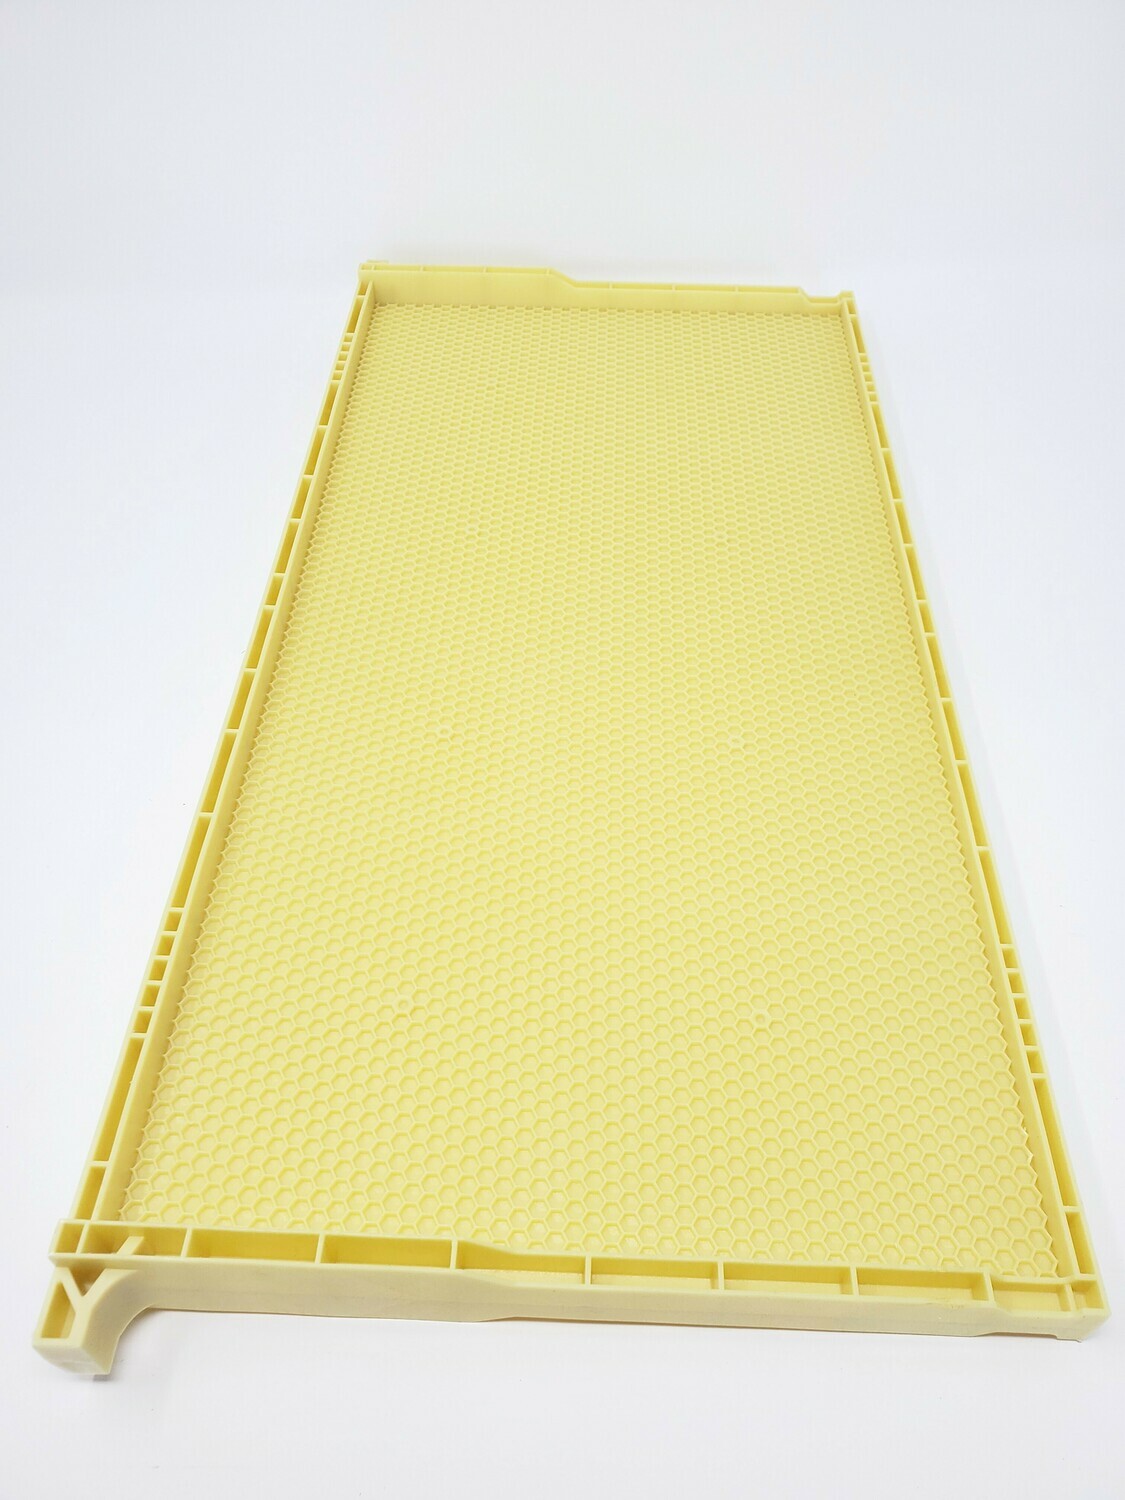 Pierco Plastic frames with waxed sheets